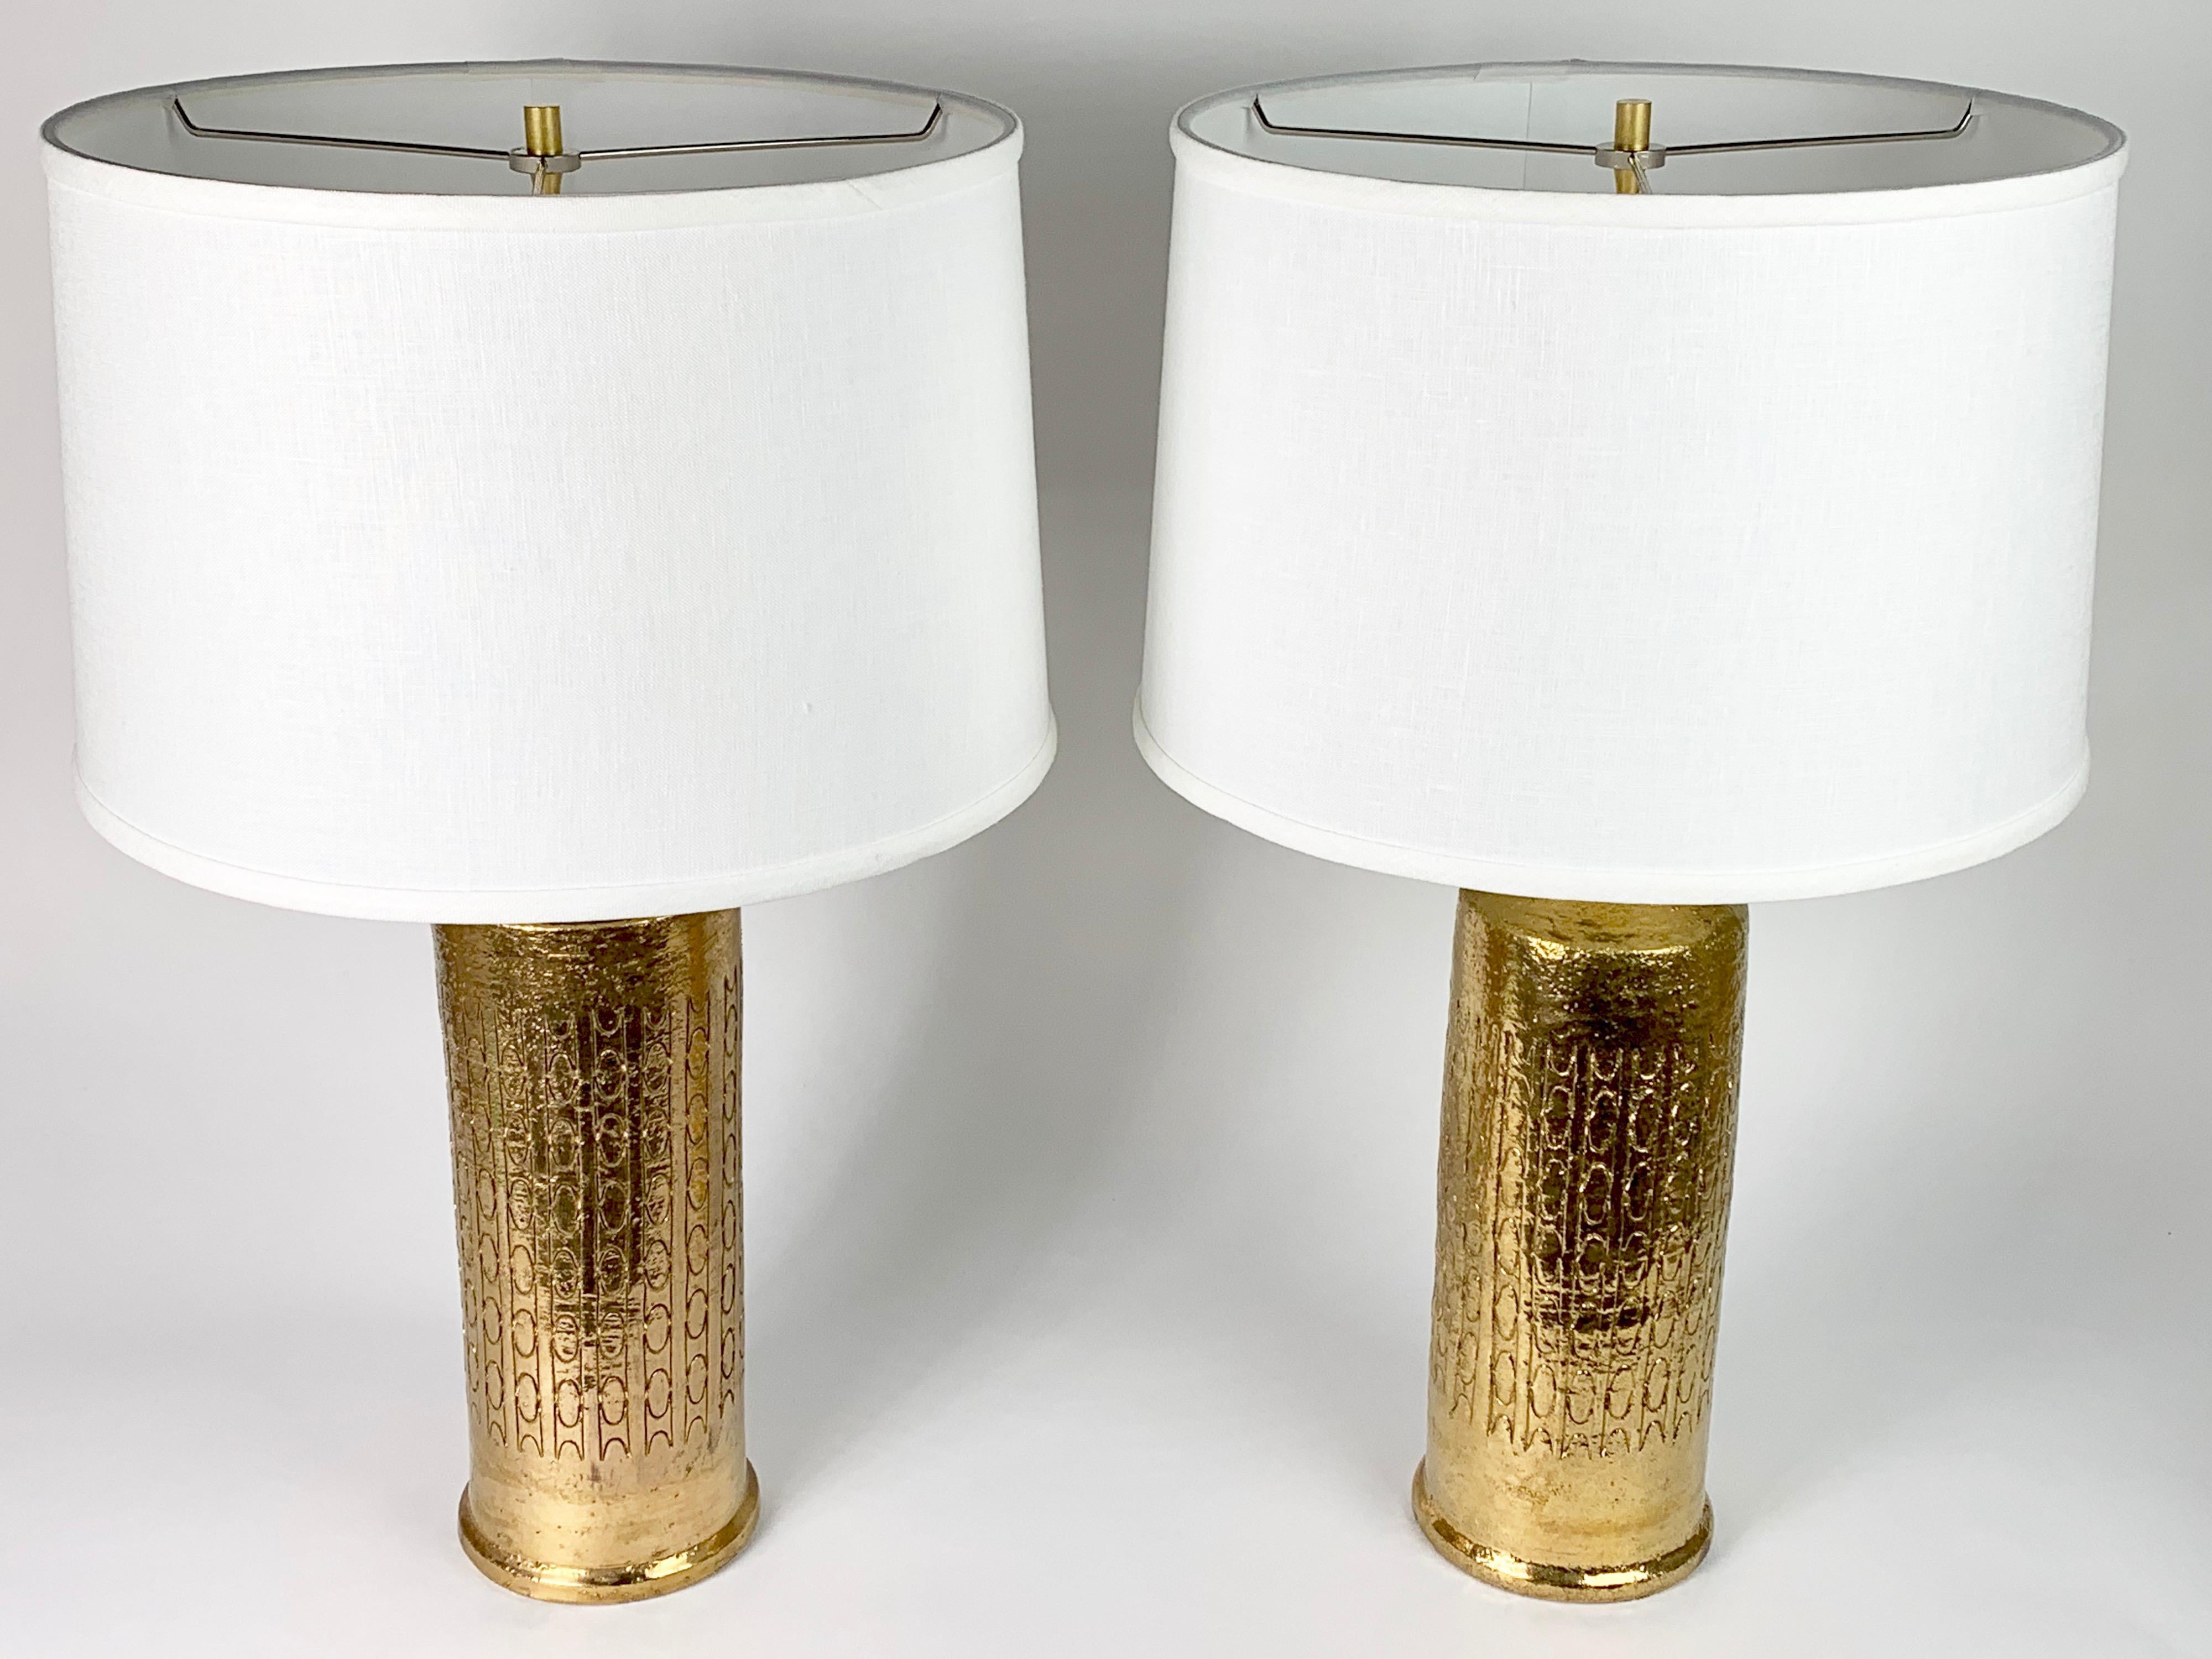 Bitossi lamps Italy, 1970 gold glaze, extremely elegant, these were produced by Bitossi the Italian ceramic manufacturer in the early 1970s as a limited edition made for the Swedish lighting manufacturer Bergboms and has the sticker from Bergboms